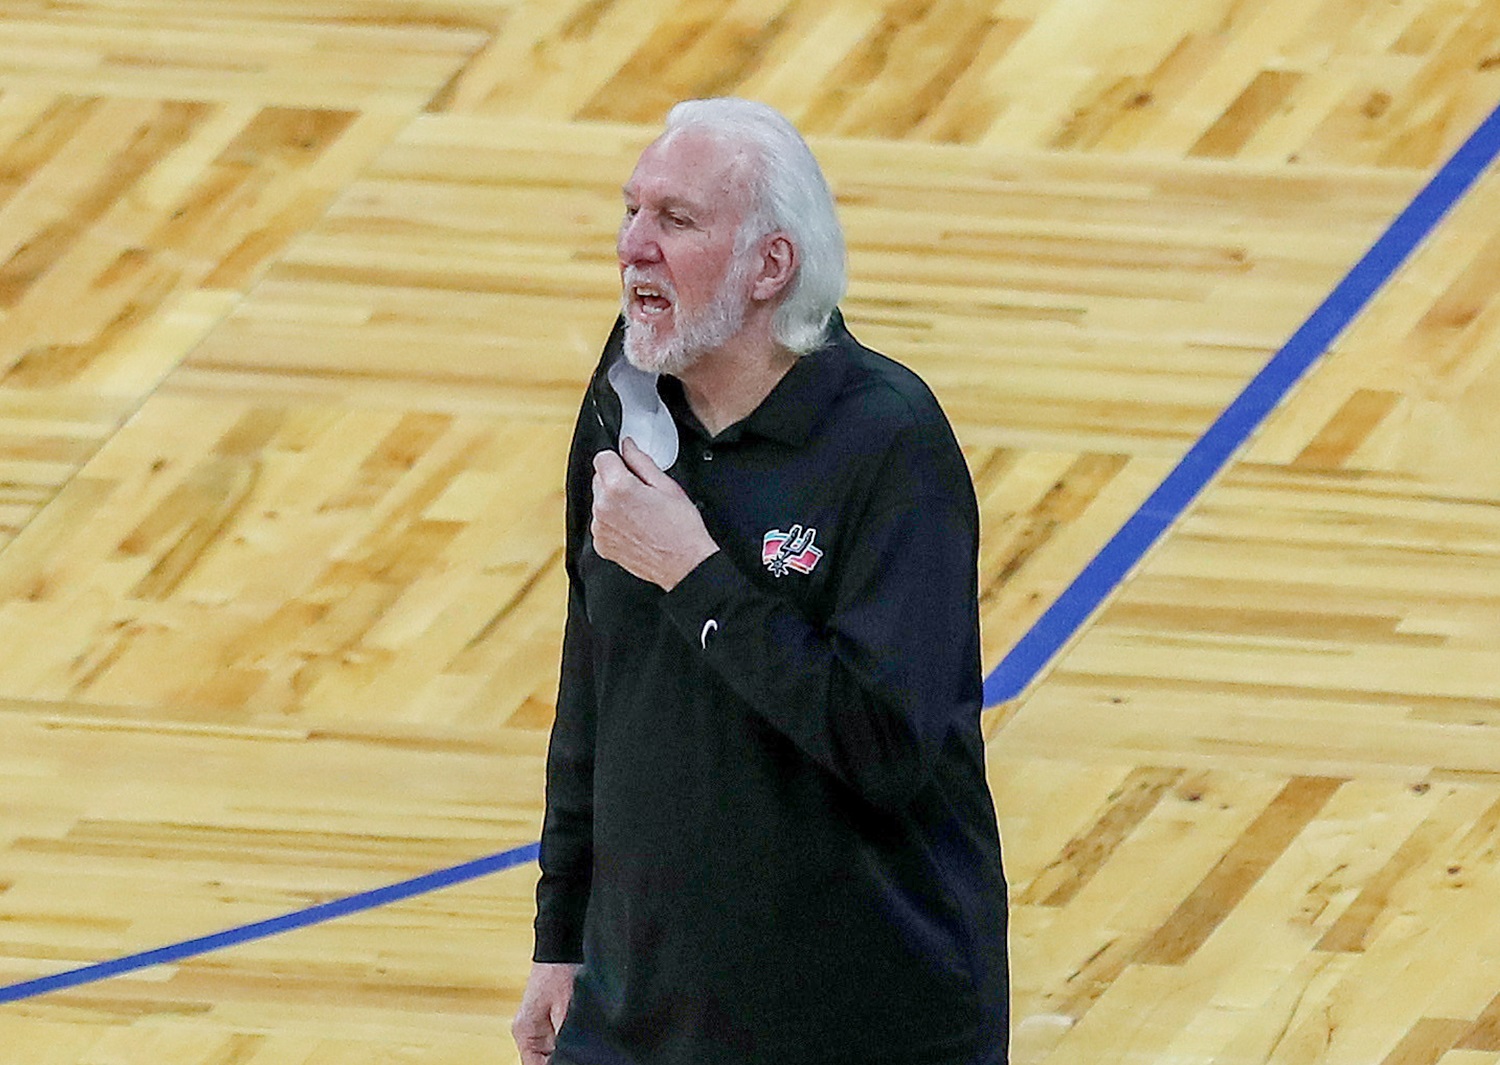 Gregg Popovich lost more games, albeit exhibitions, in the past week than Mike Krzyzewski did in a decade of overseeing Team USA in men's international basketball. | Alex Menendez/Getty Images